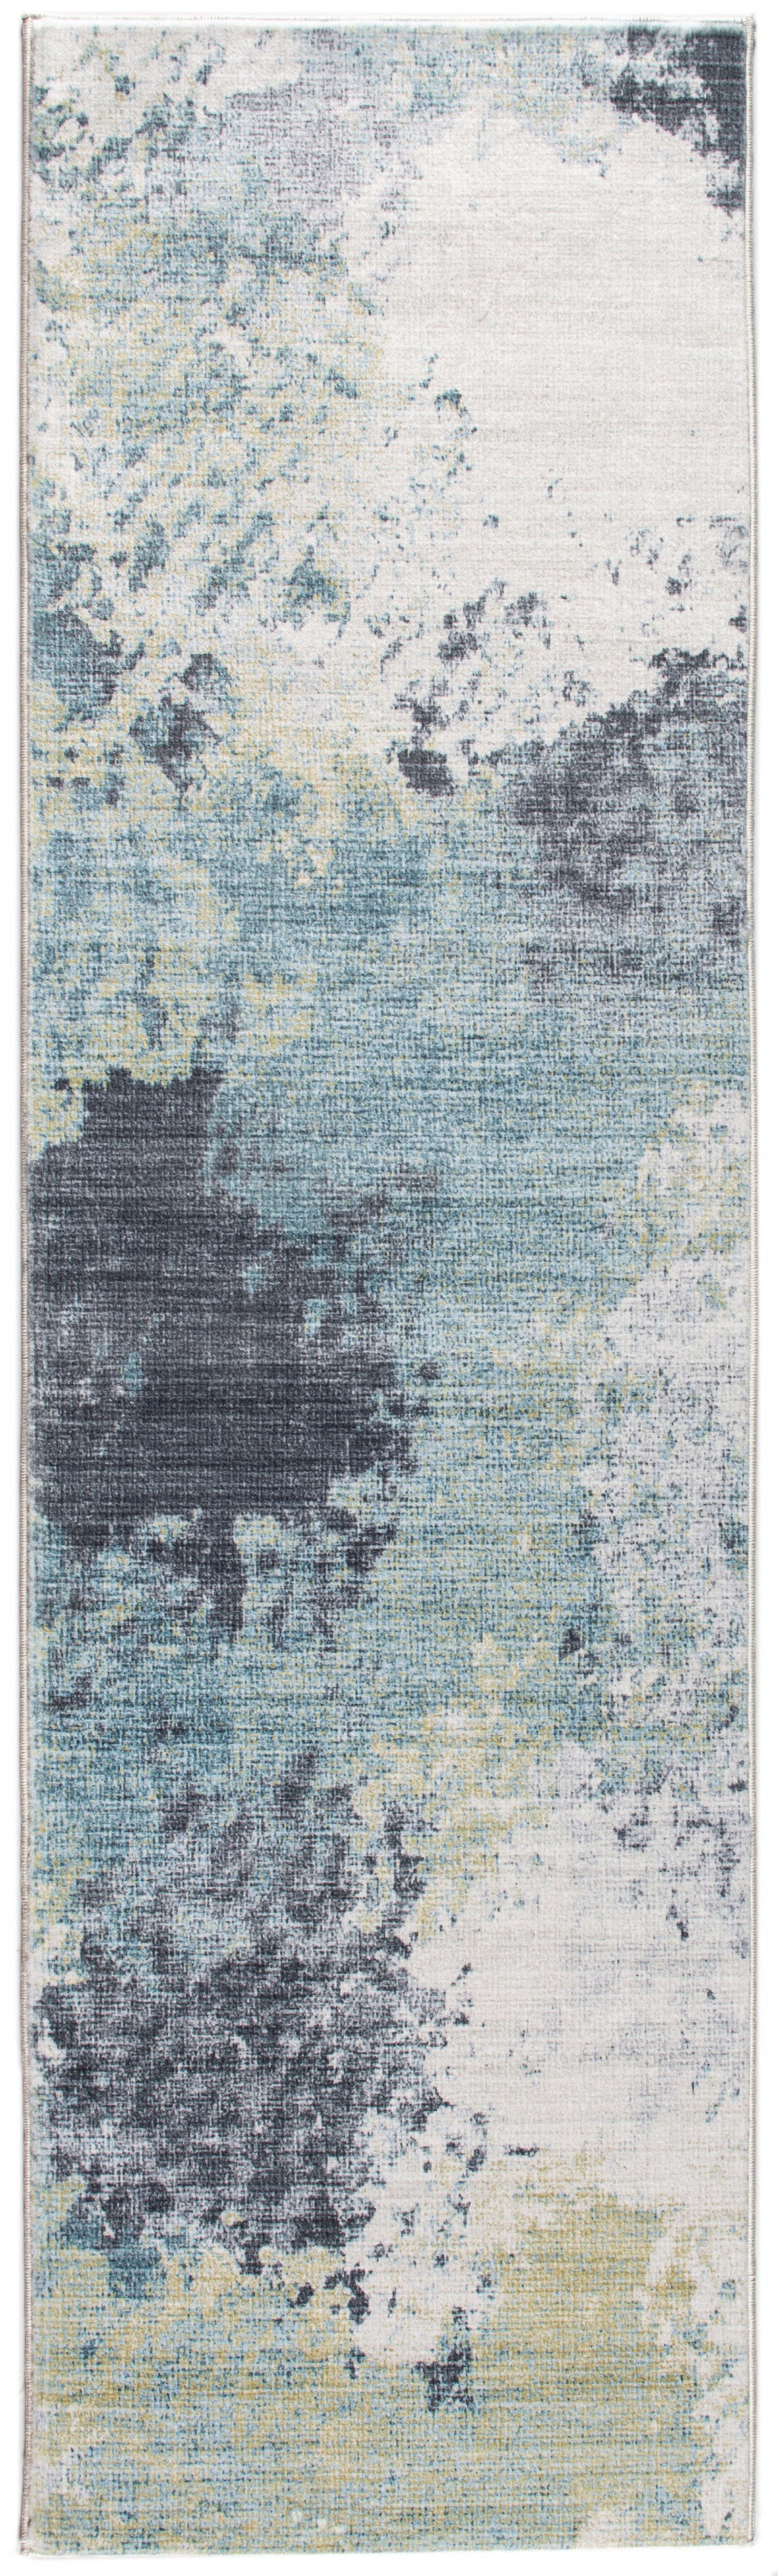 5’ x 8’ Blue Yellow Abstract Sky Area Rug